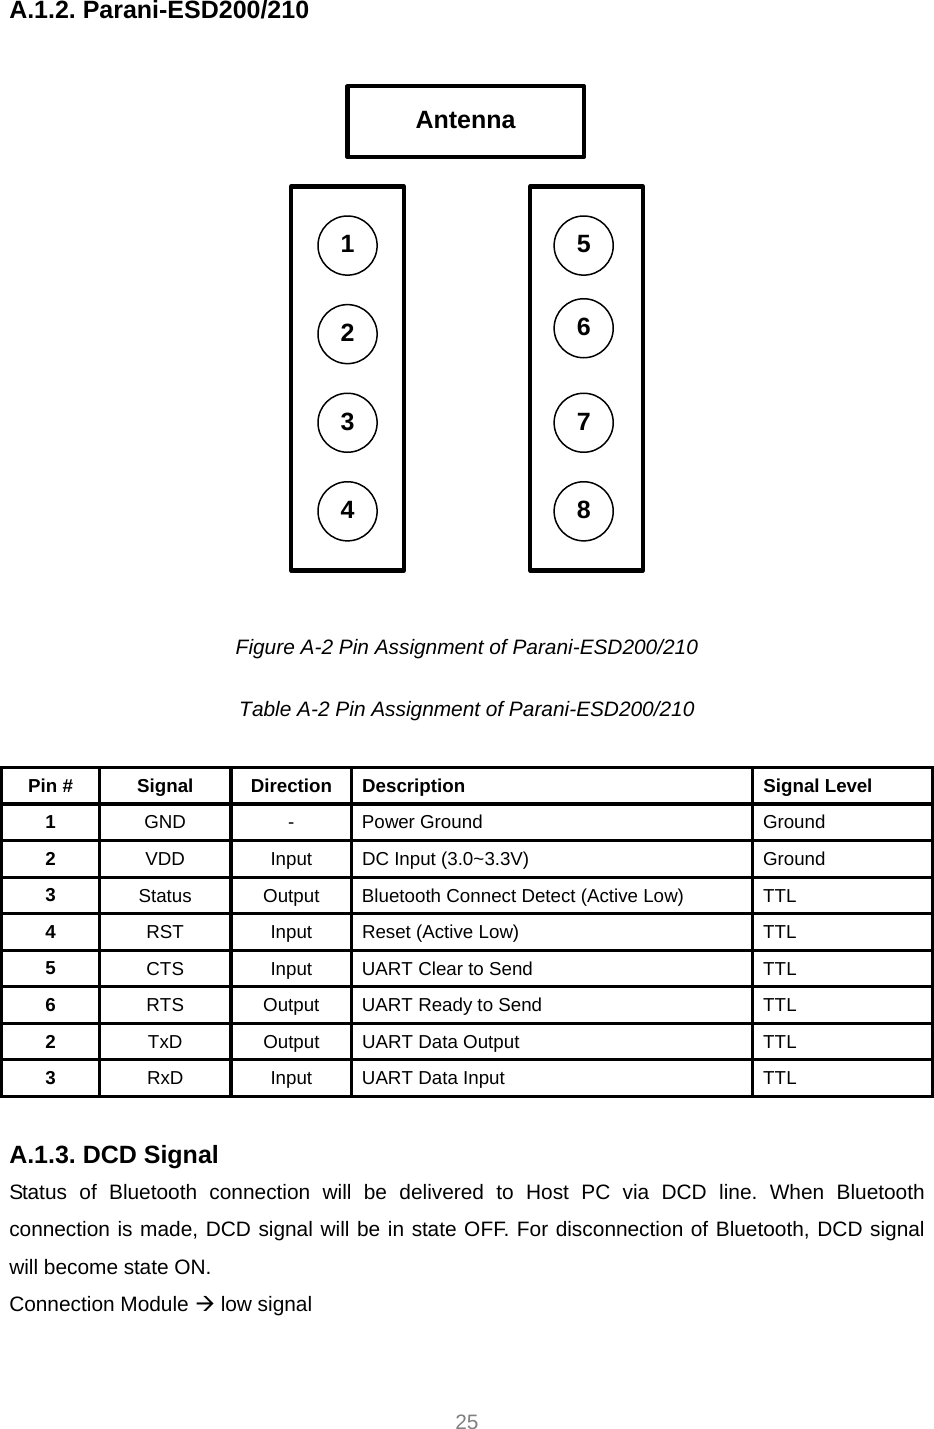     25 A.1.2. Parani-ESD200/210  Antenna12654387  Figure A-2 Pin Assignment of Parani-ESD200/210  Table A-2 Pin Assignment of Parani-ESD200/210  Pin #  Signal  Direction  Description  Signal Level 1  GND - Power Ground  Ground 2  VDD  Input  DC Input (3.0~3.3V)  Ground 3  Status Output Bluetooth Connect Detect (Active Low)  TTL 4  RST  Input  Reset (Active Low)  TTL 5  CTS  Input  UART Clear to Send  TTL 6  RTS  Output  UART Ready to Send  TTL 2  TxD  Output  UART Data Output  TTL 3  RxD  Input  UART Data Input  TTL  A.1.3. DCD Signal Status of Bluetooth connection will be delivered to Host PC via DCD line. When Bluetooth connection is made, DCD signal will be in state OFF. For disconnection of Bluetooth, DCD signal will become state ON.   Connection Module Æ low signal  